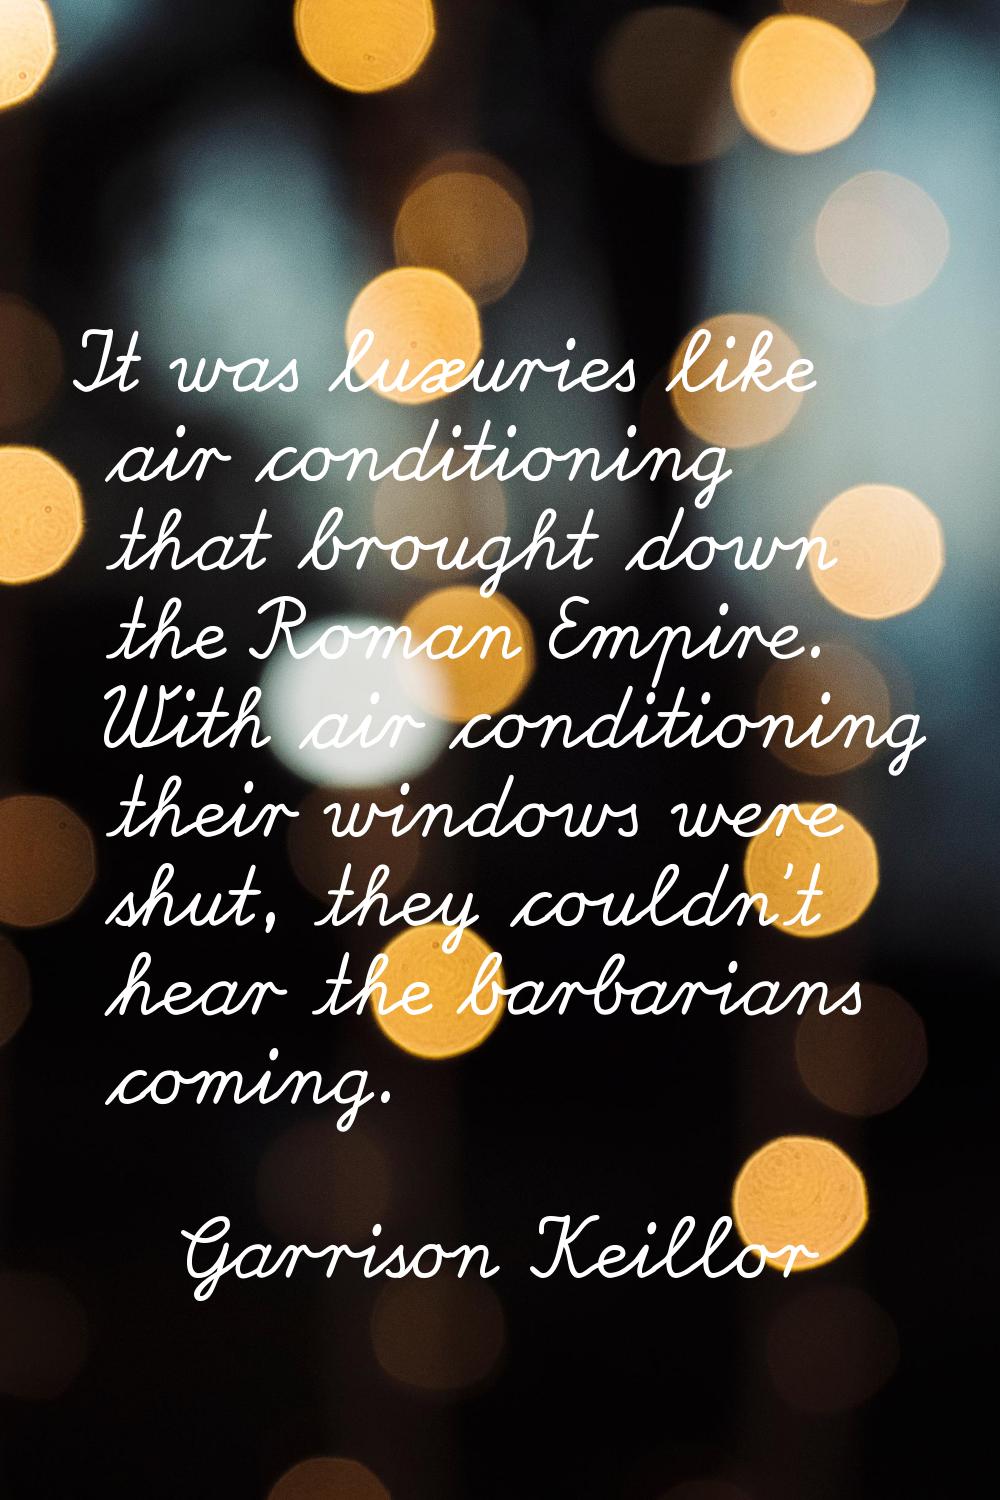 It was luxuries like air conditioning that brought down the Roman Empire. With air conditioning the